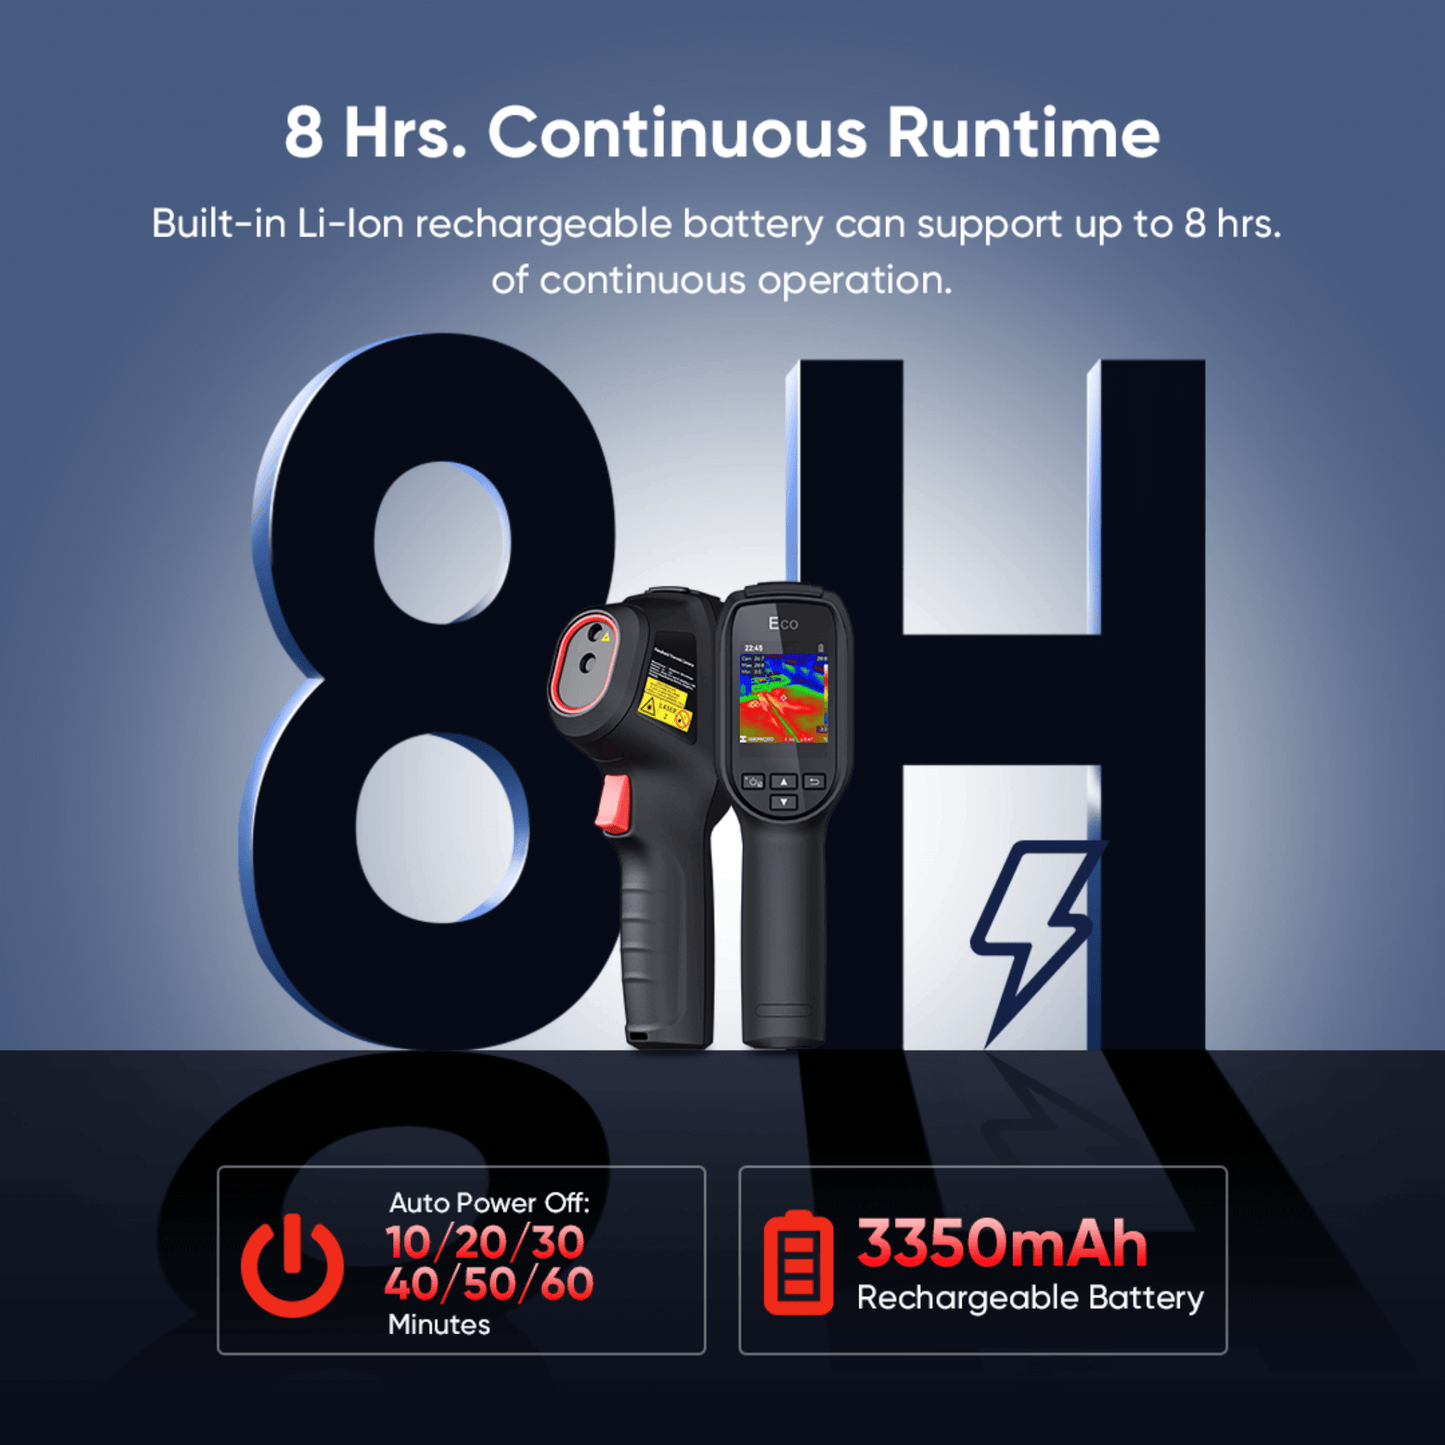 Get 8 hours of continuous use from the Bi-Spectrum HikMicro Eco-V Handheld Thermal Imager 